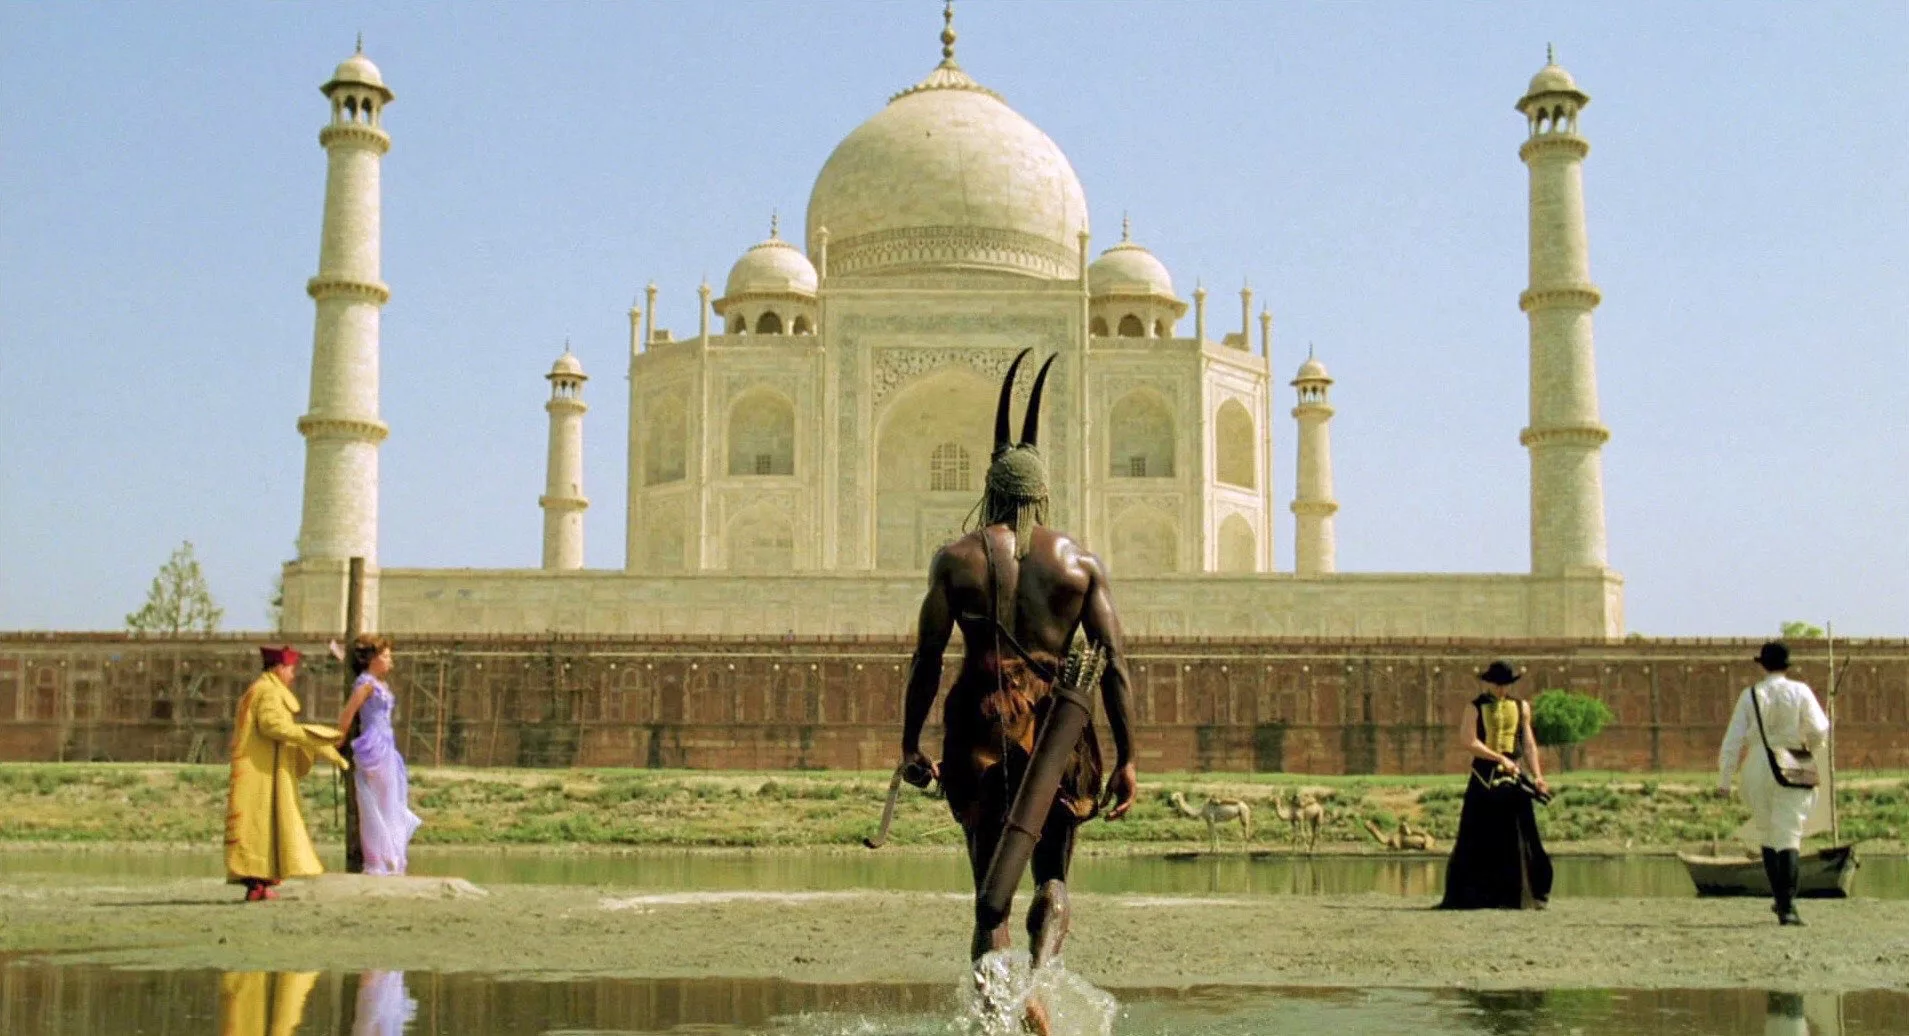 A large, dark man where a helmet with horns & a quiver of arrows slung 'round his shoulder, stands with his back us in front of the Taj Mahal, with a woman being tied to a pole on his left, a man in a black, wide-brimmed hat & a black, gold-laced, sleeveless shirt who appears to be holding a pistol & another man dress in white robes and a black bowler hat, to his right. Way in the background, 3 saddled camels await by a mote.